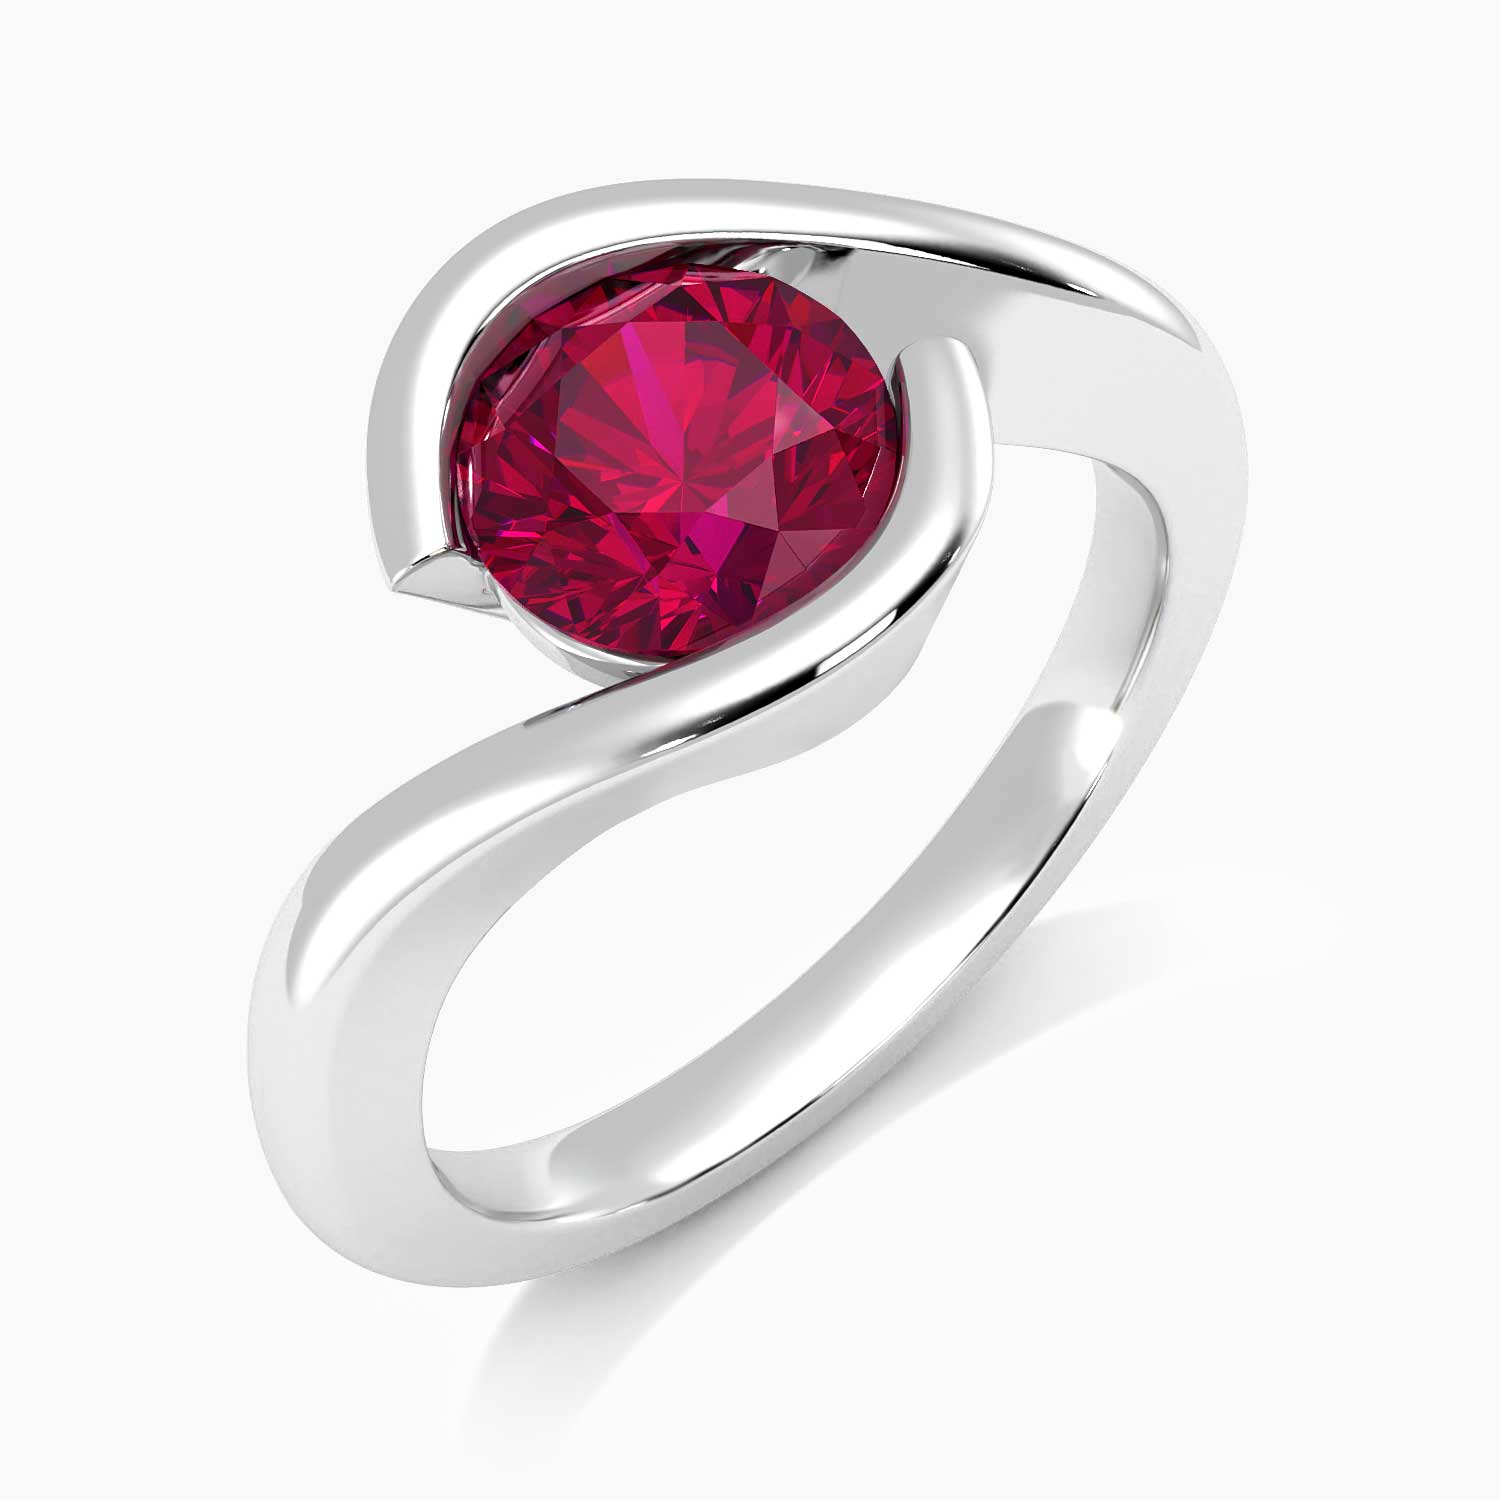 side view of the ring showing ruby gemstone and setting